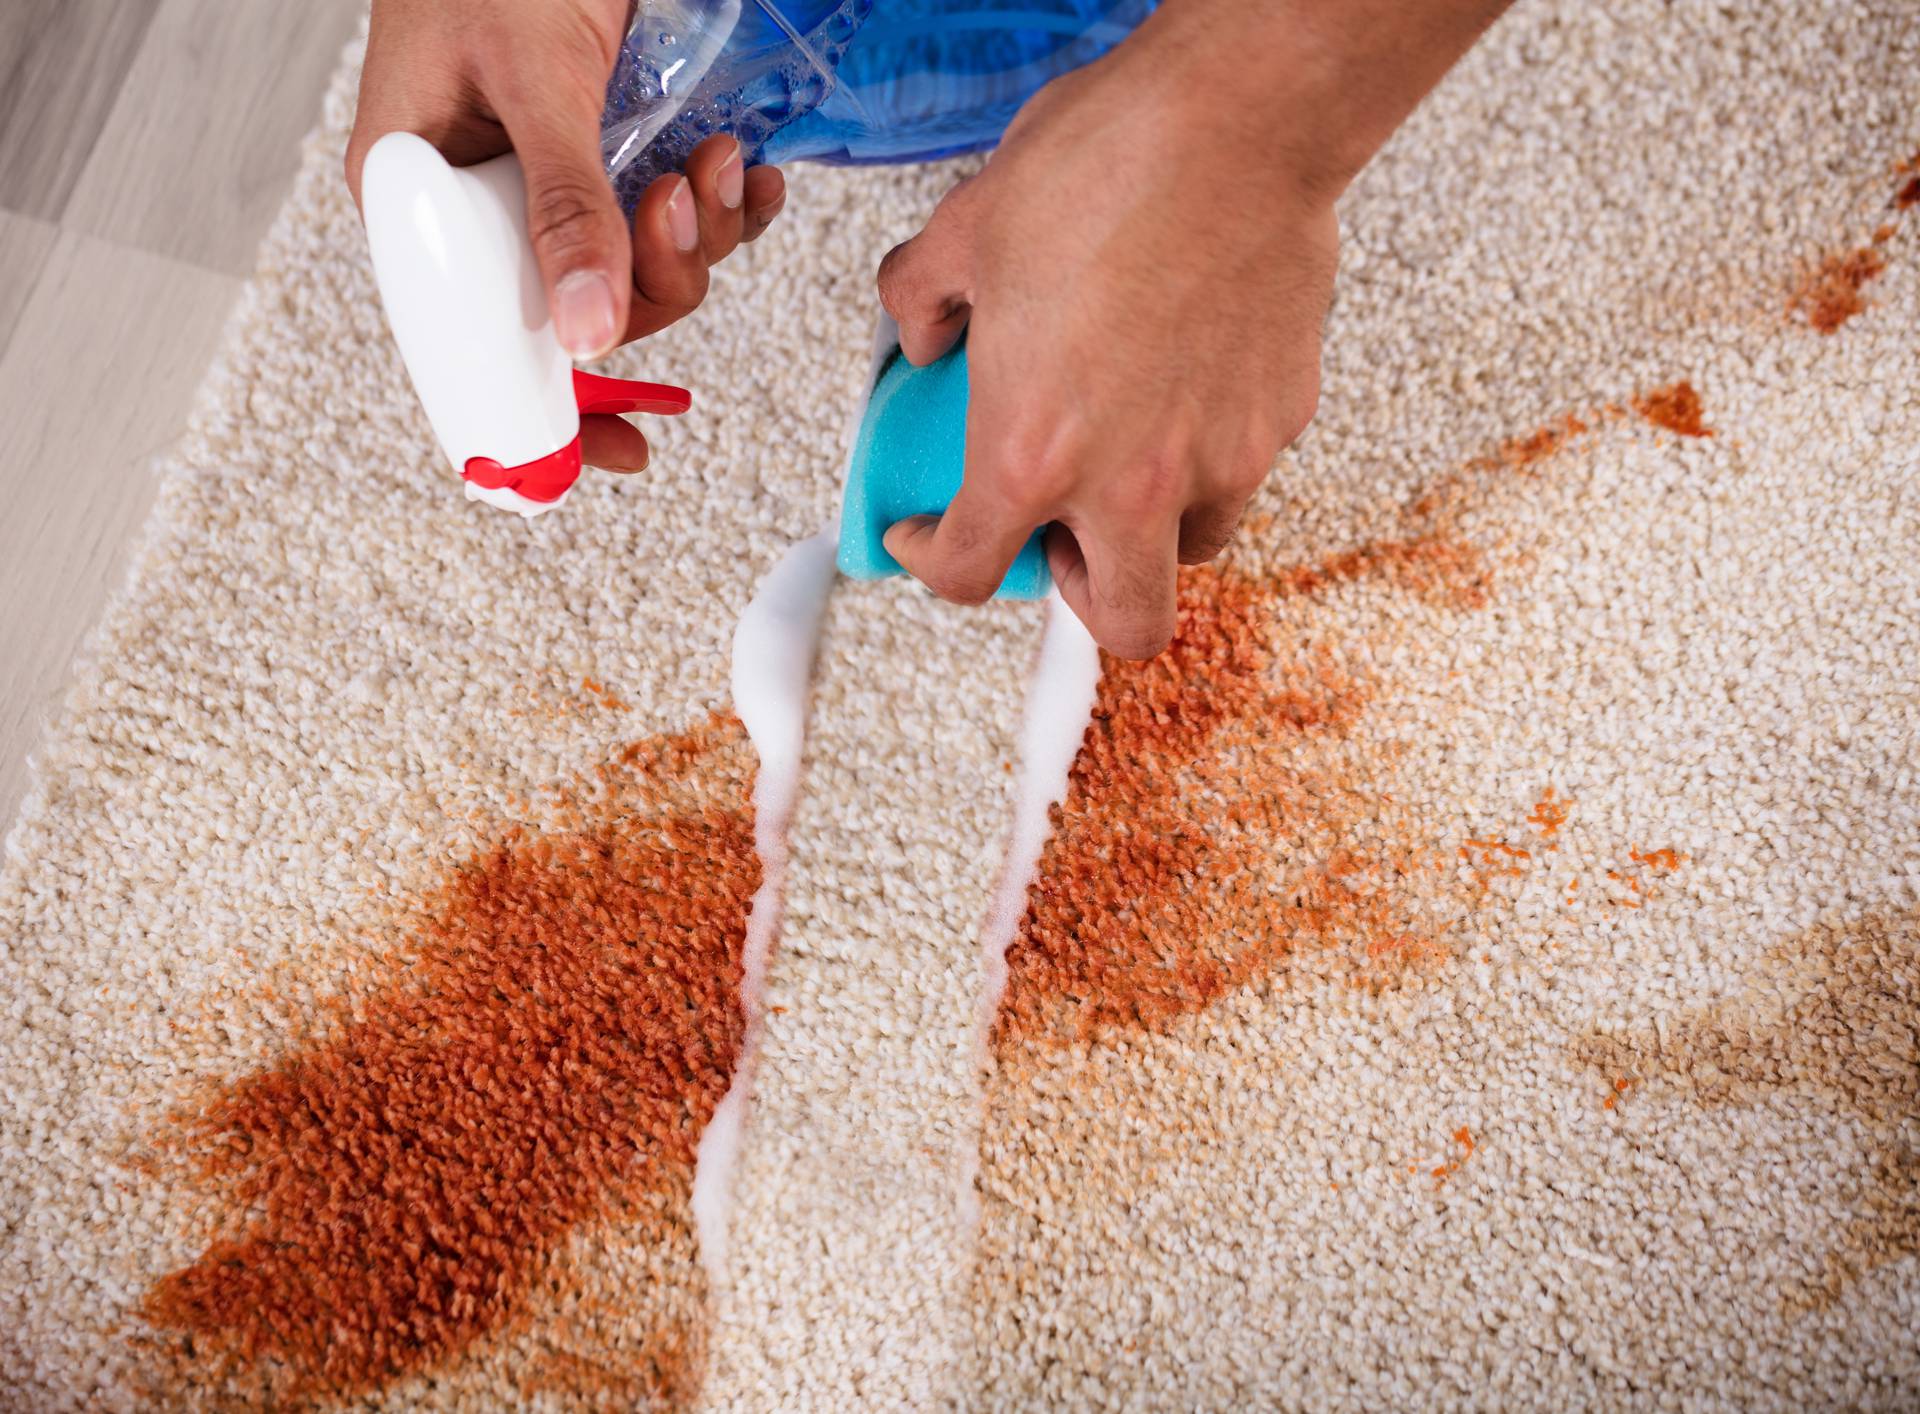 Janitor Cleaning Stain On Carpet